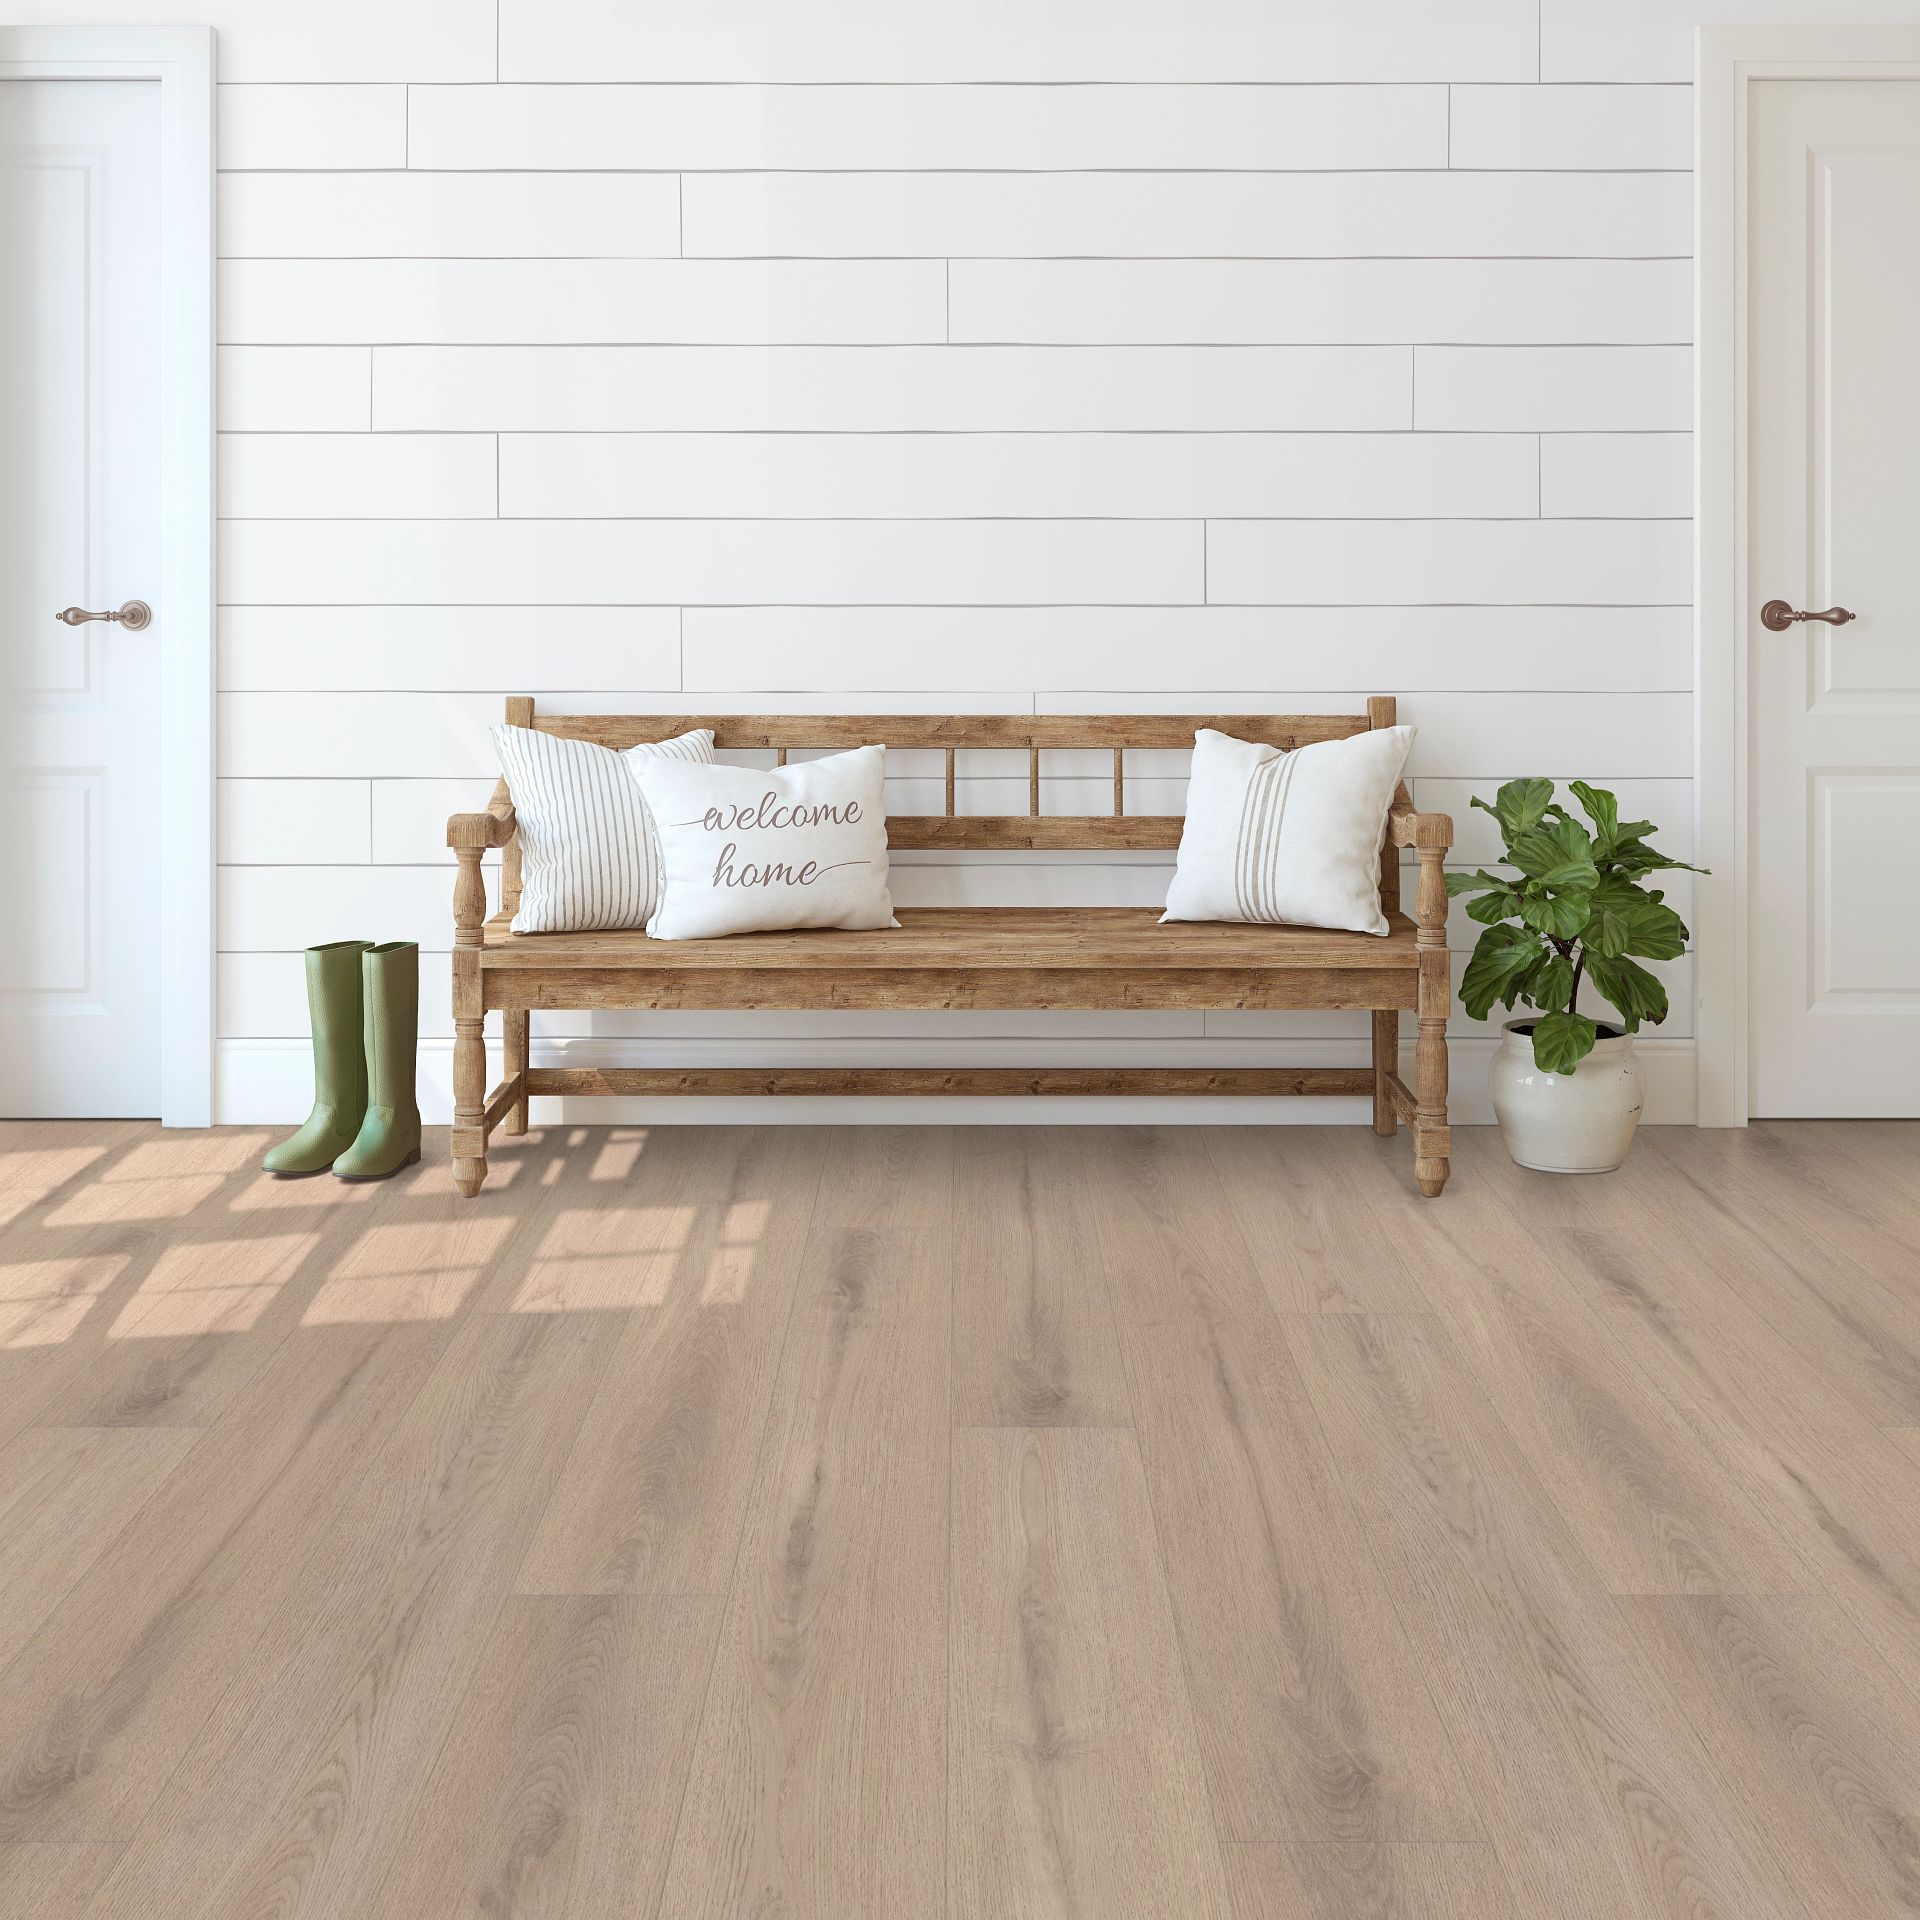 Waterproof Flooring? LVT & LVP – What's The Difference? - Quick